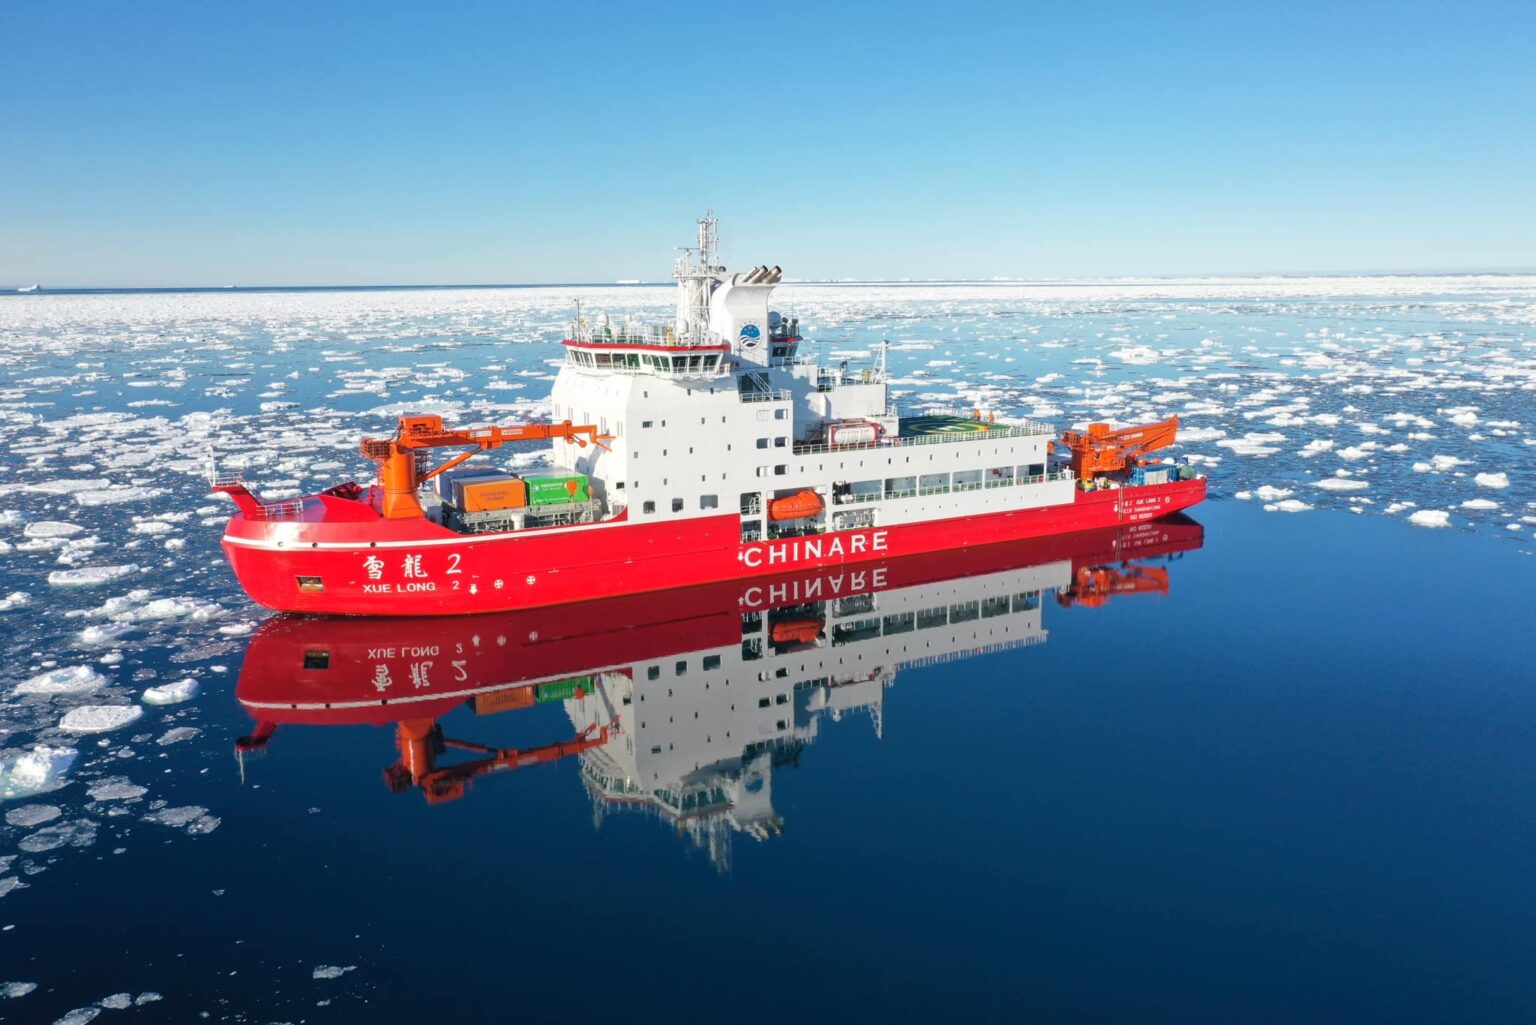 get a free tour of icebreaker xue long 2